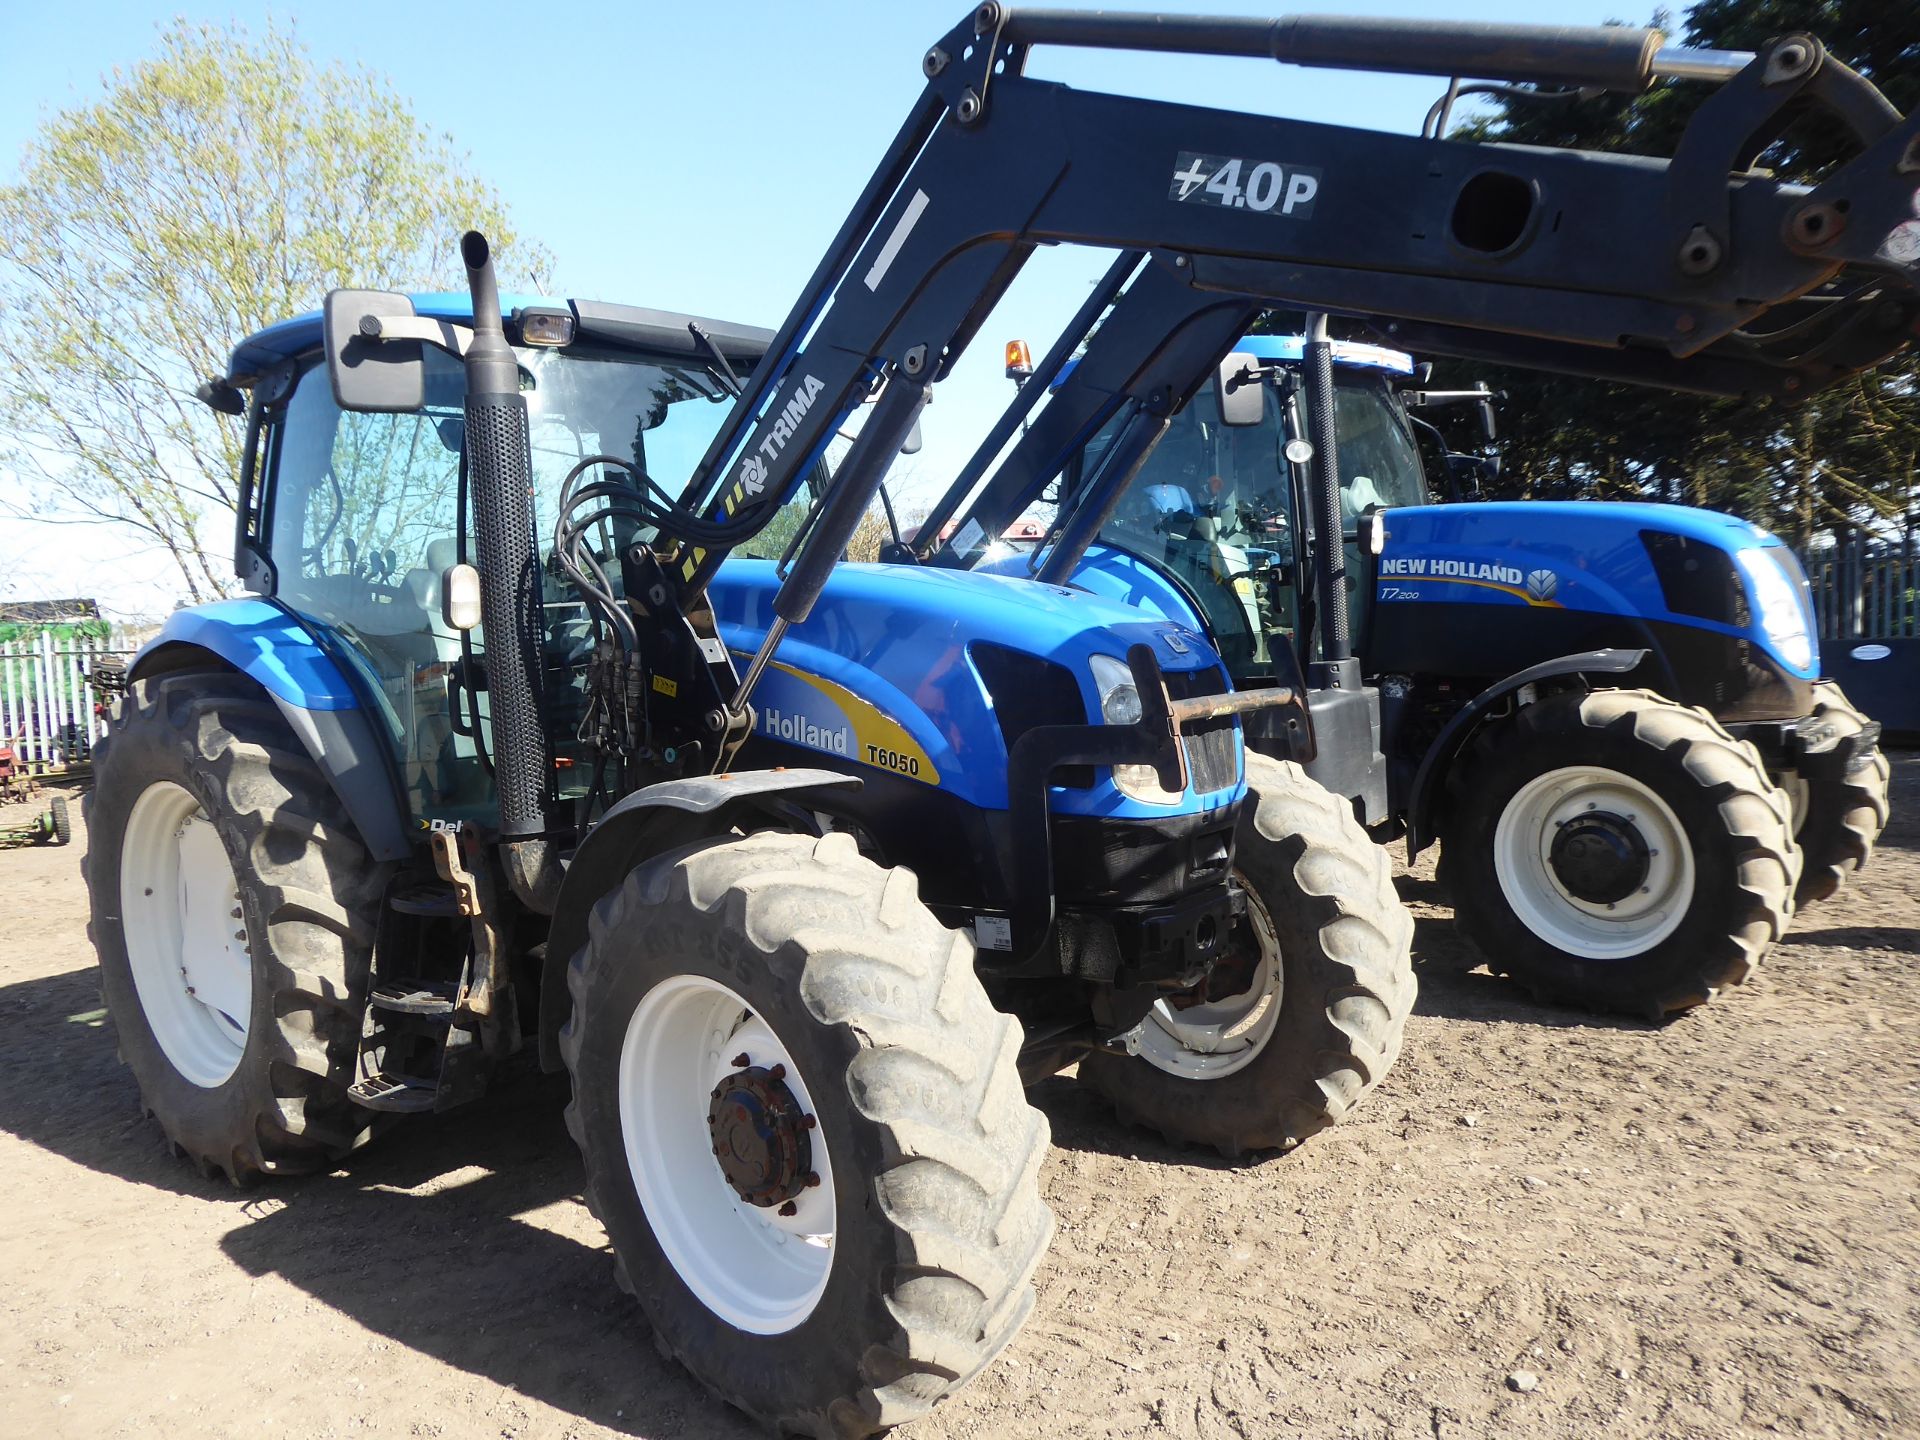 2008 New Holland T6050 tractor c/w Trima loader, GX57 GXB, 40km/hr, 8609hrs - Image 2 of 2